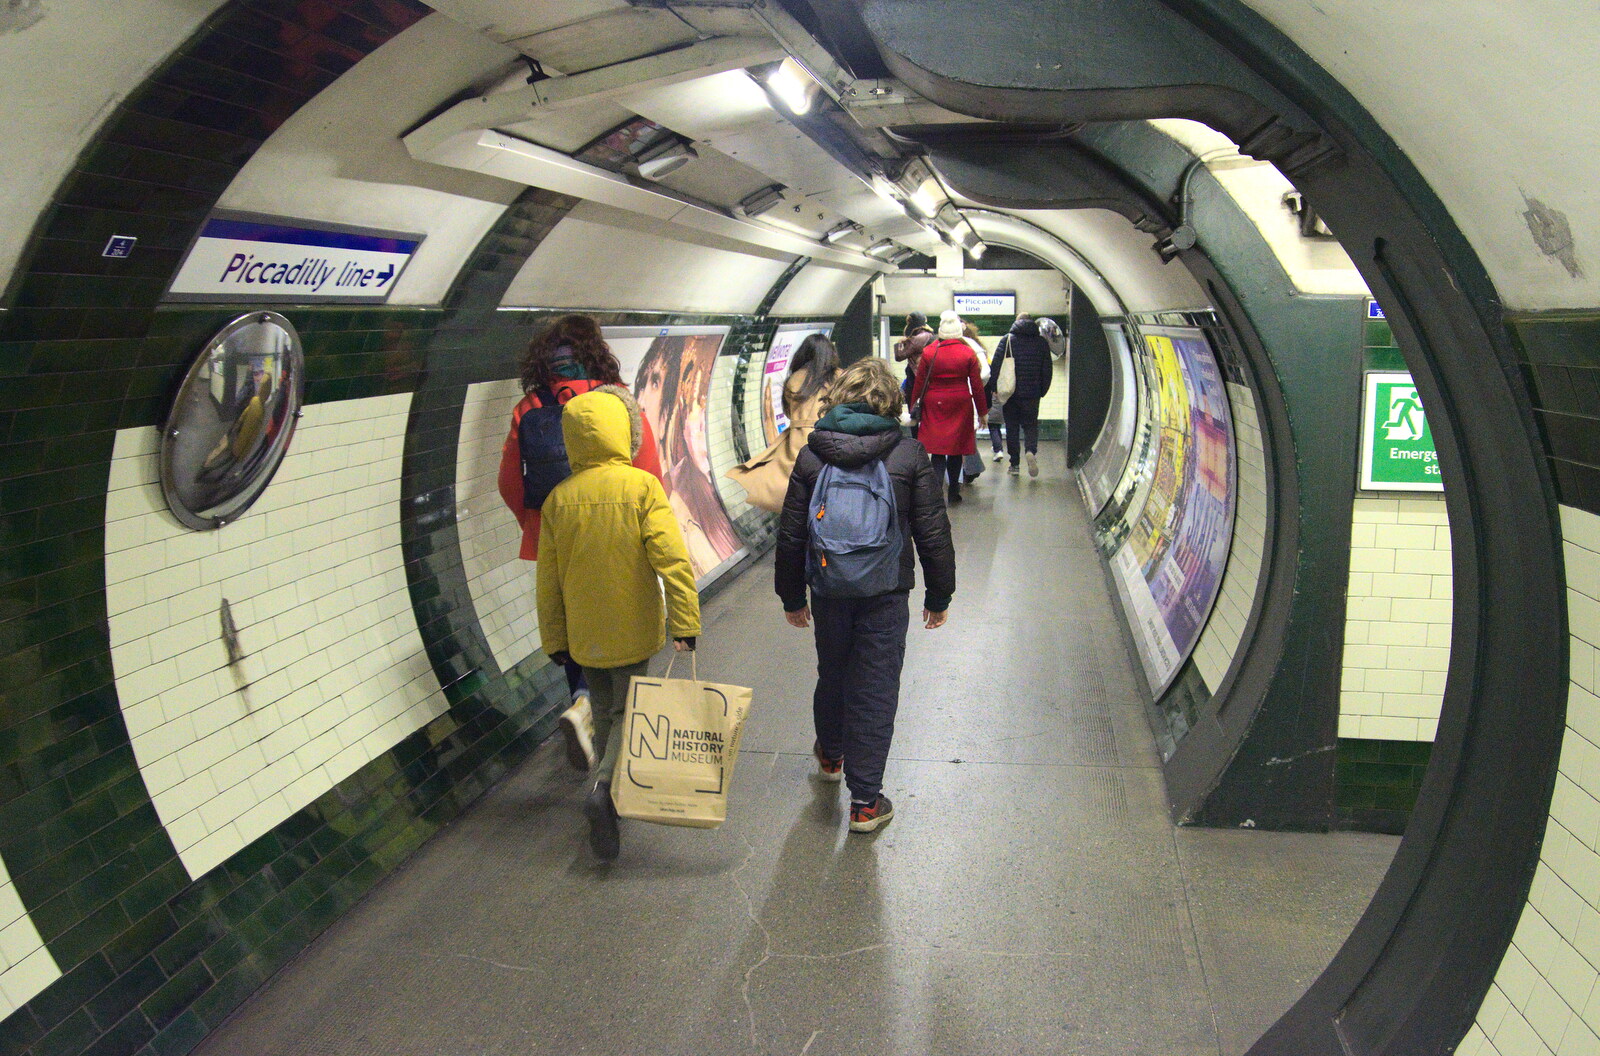 We're back on the underground from A Trip to the Natural History Museum, Kensington, London - 15th January 2022